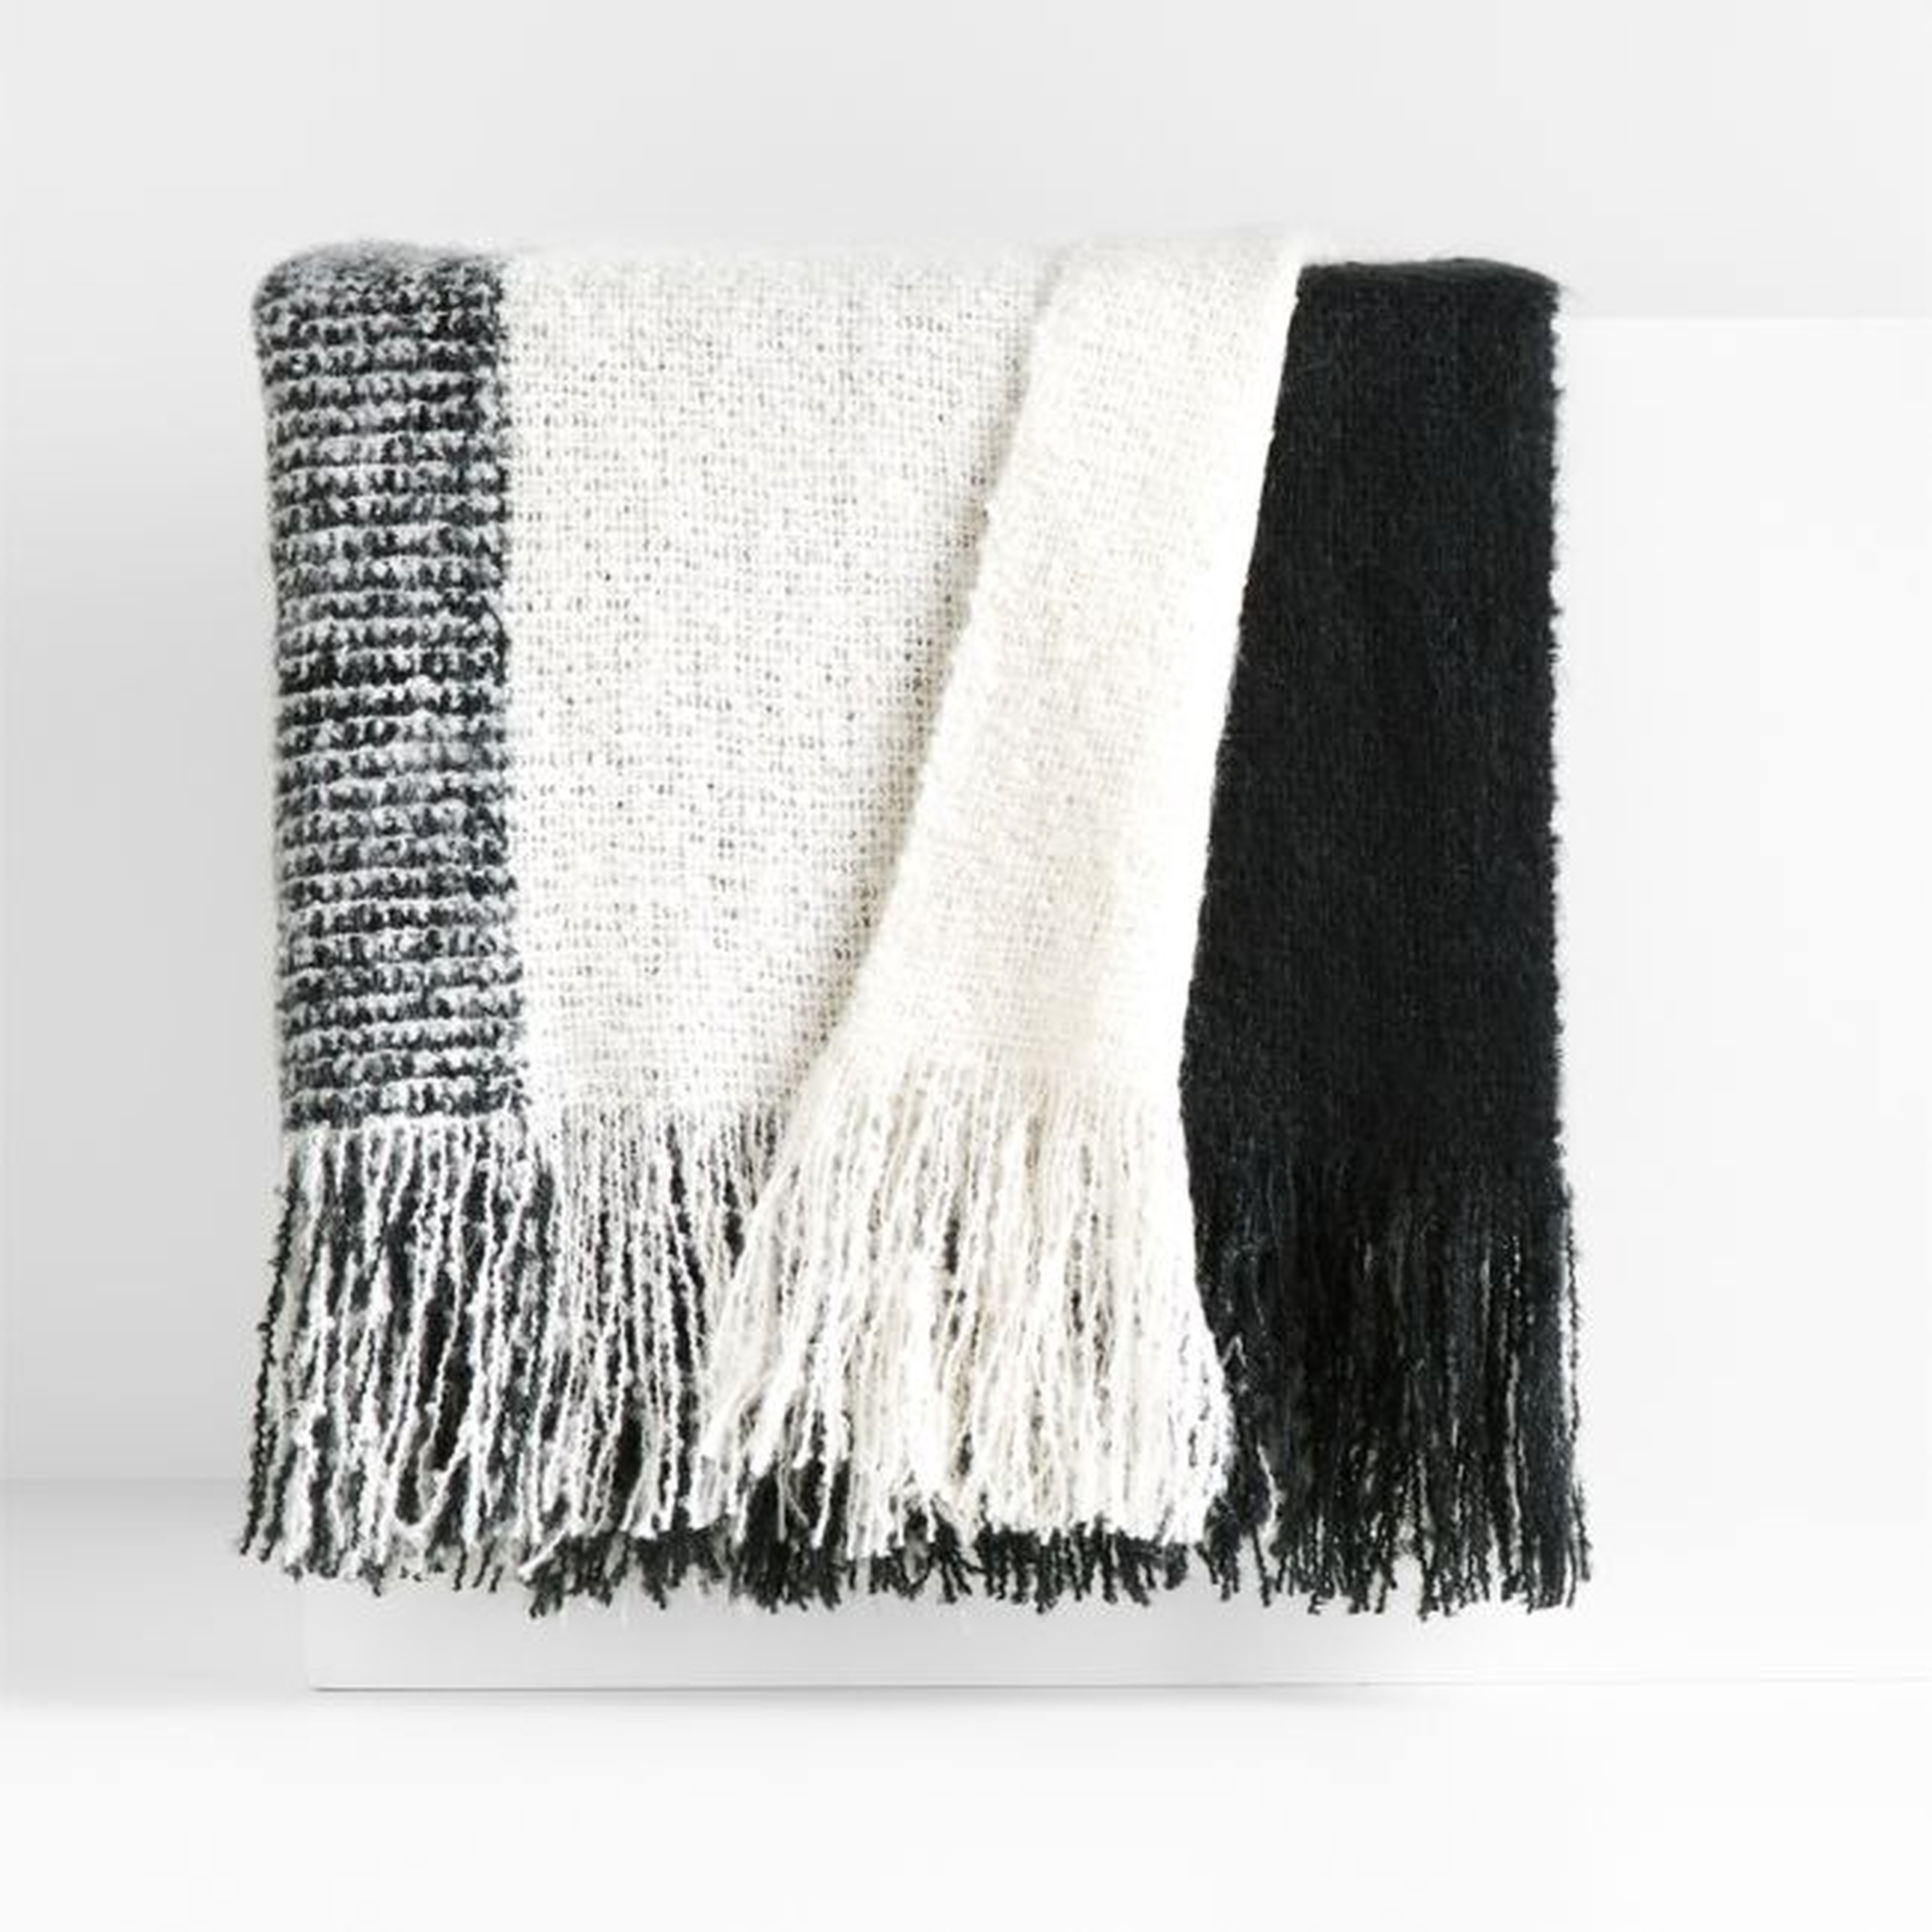 Letti 70"x55" Black Throw Blanket - Crate and Barrel